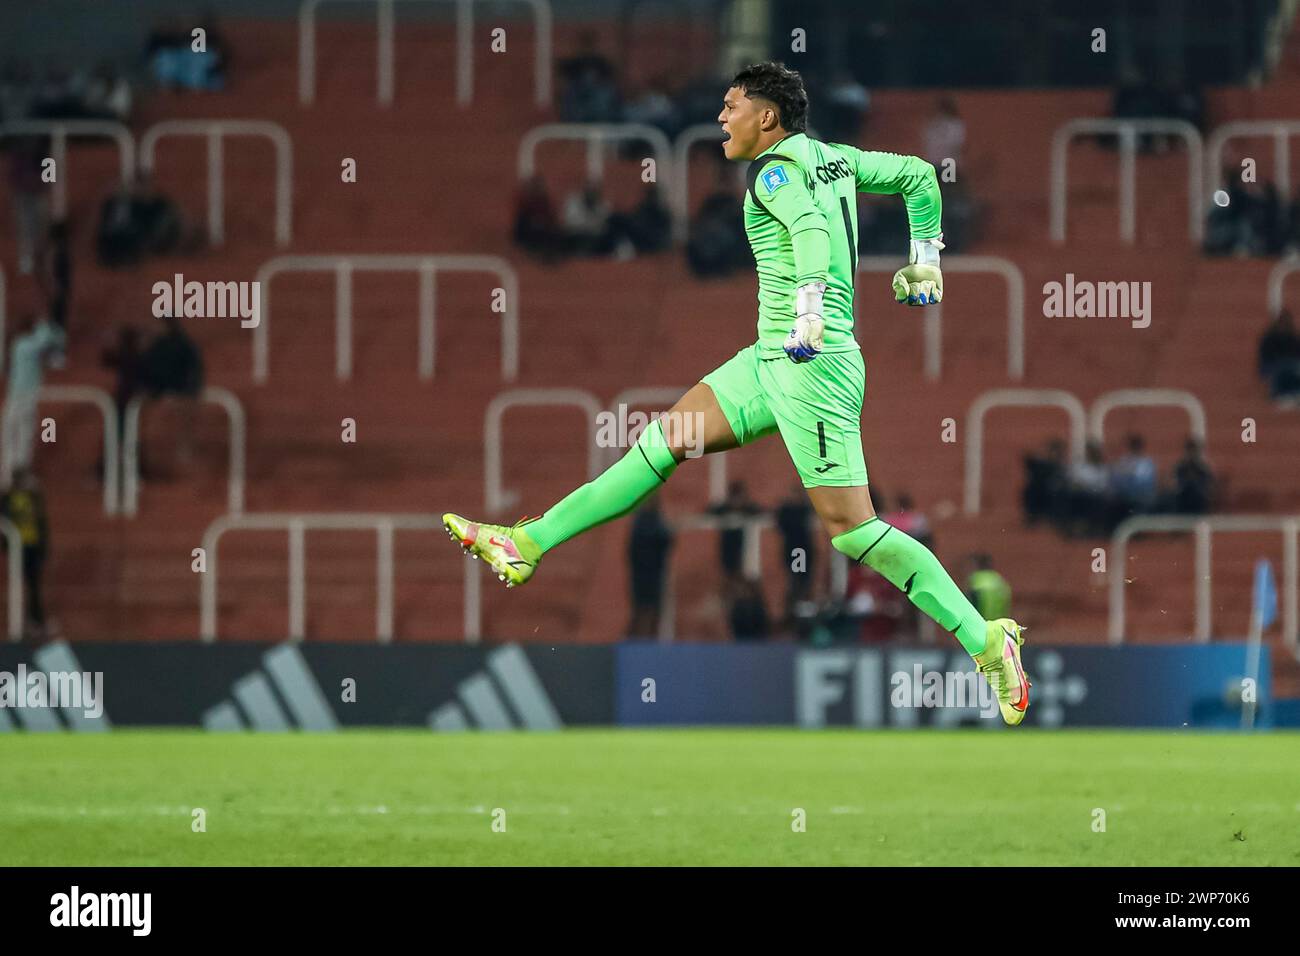 MENDOZA, ARGENTINA - MAY 25: Goalkeeper Juergen Garcia of Honduras celebrating with his team goal during FIFA U20 World Cup Argentina 2023 match betwe Stock Photo